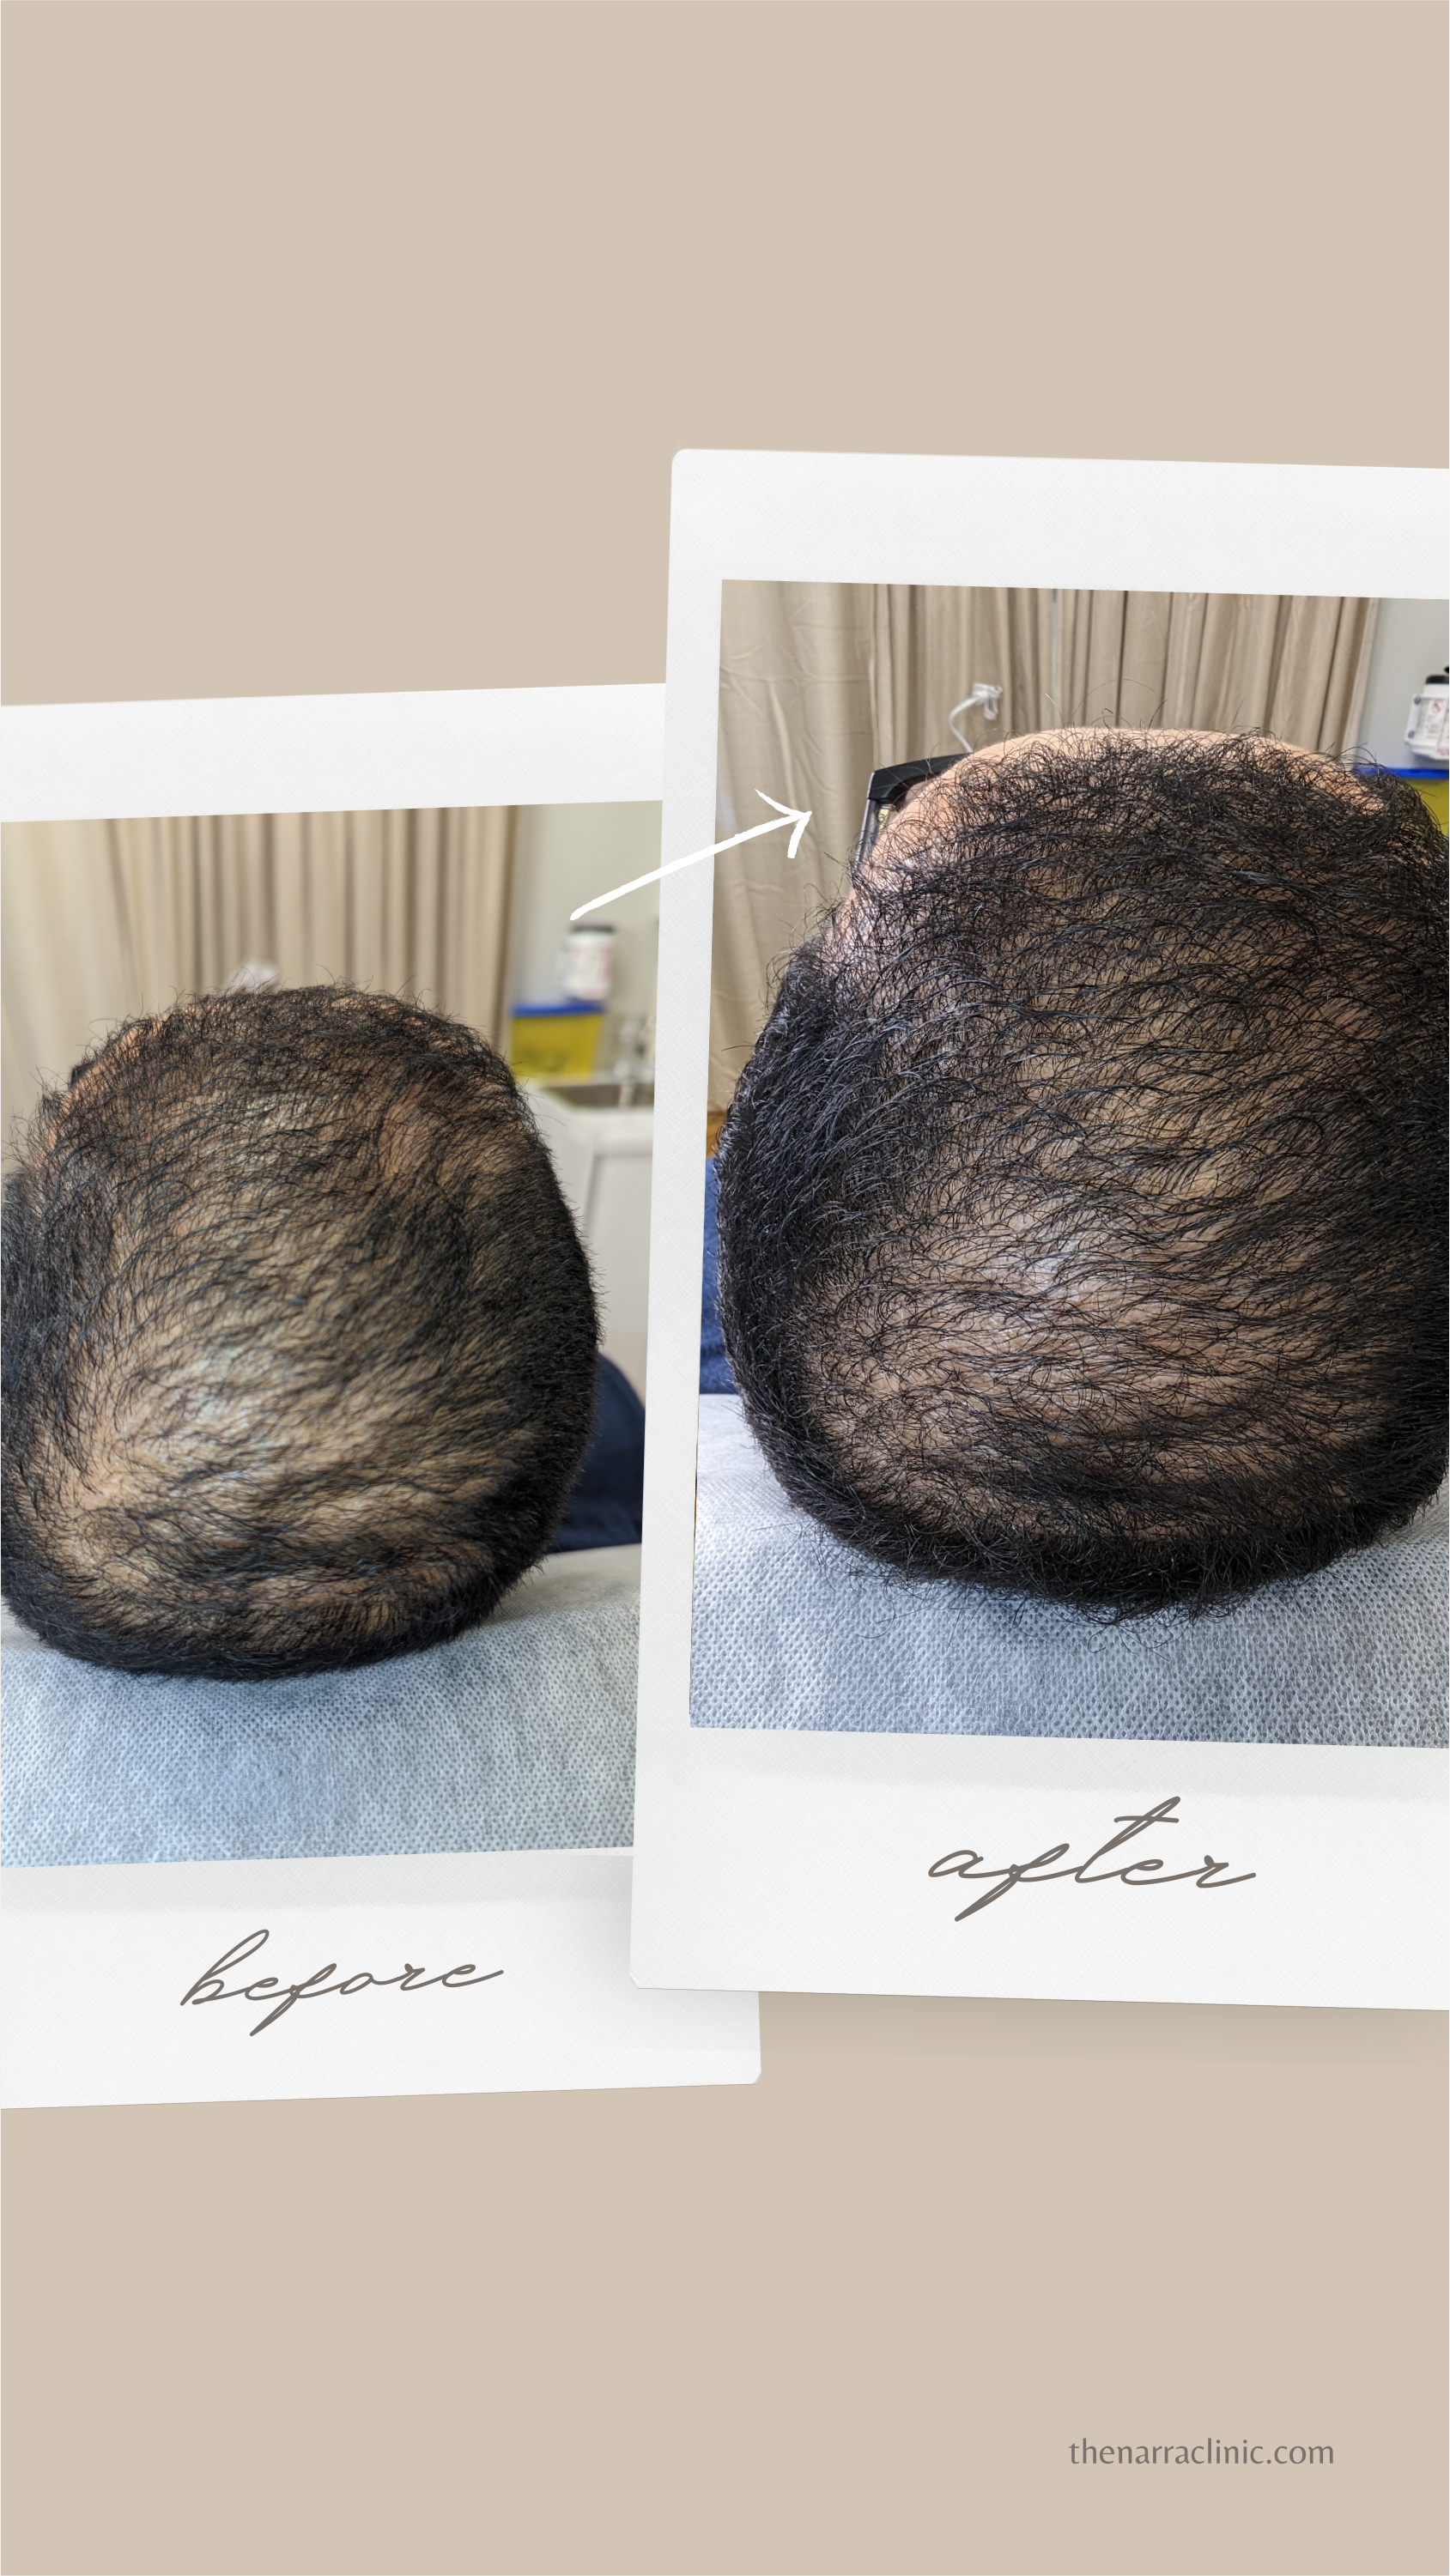 A before and after picture of a person 's head with hair loss.